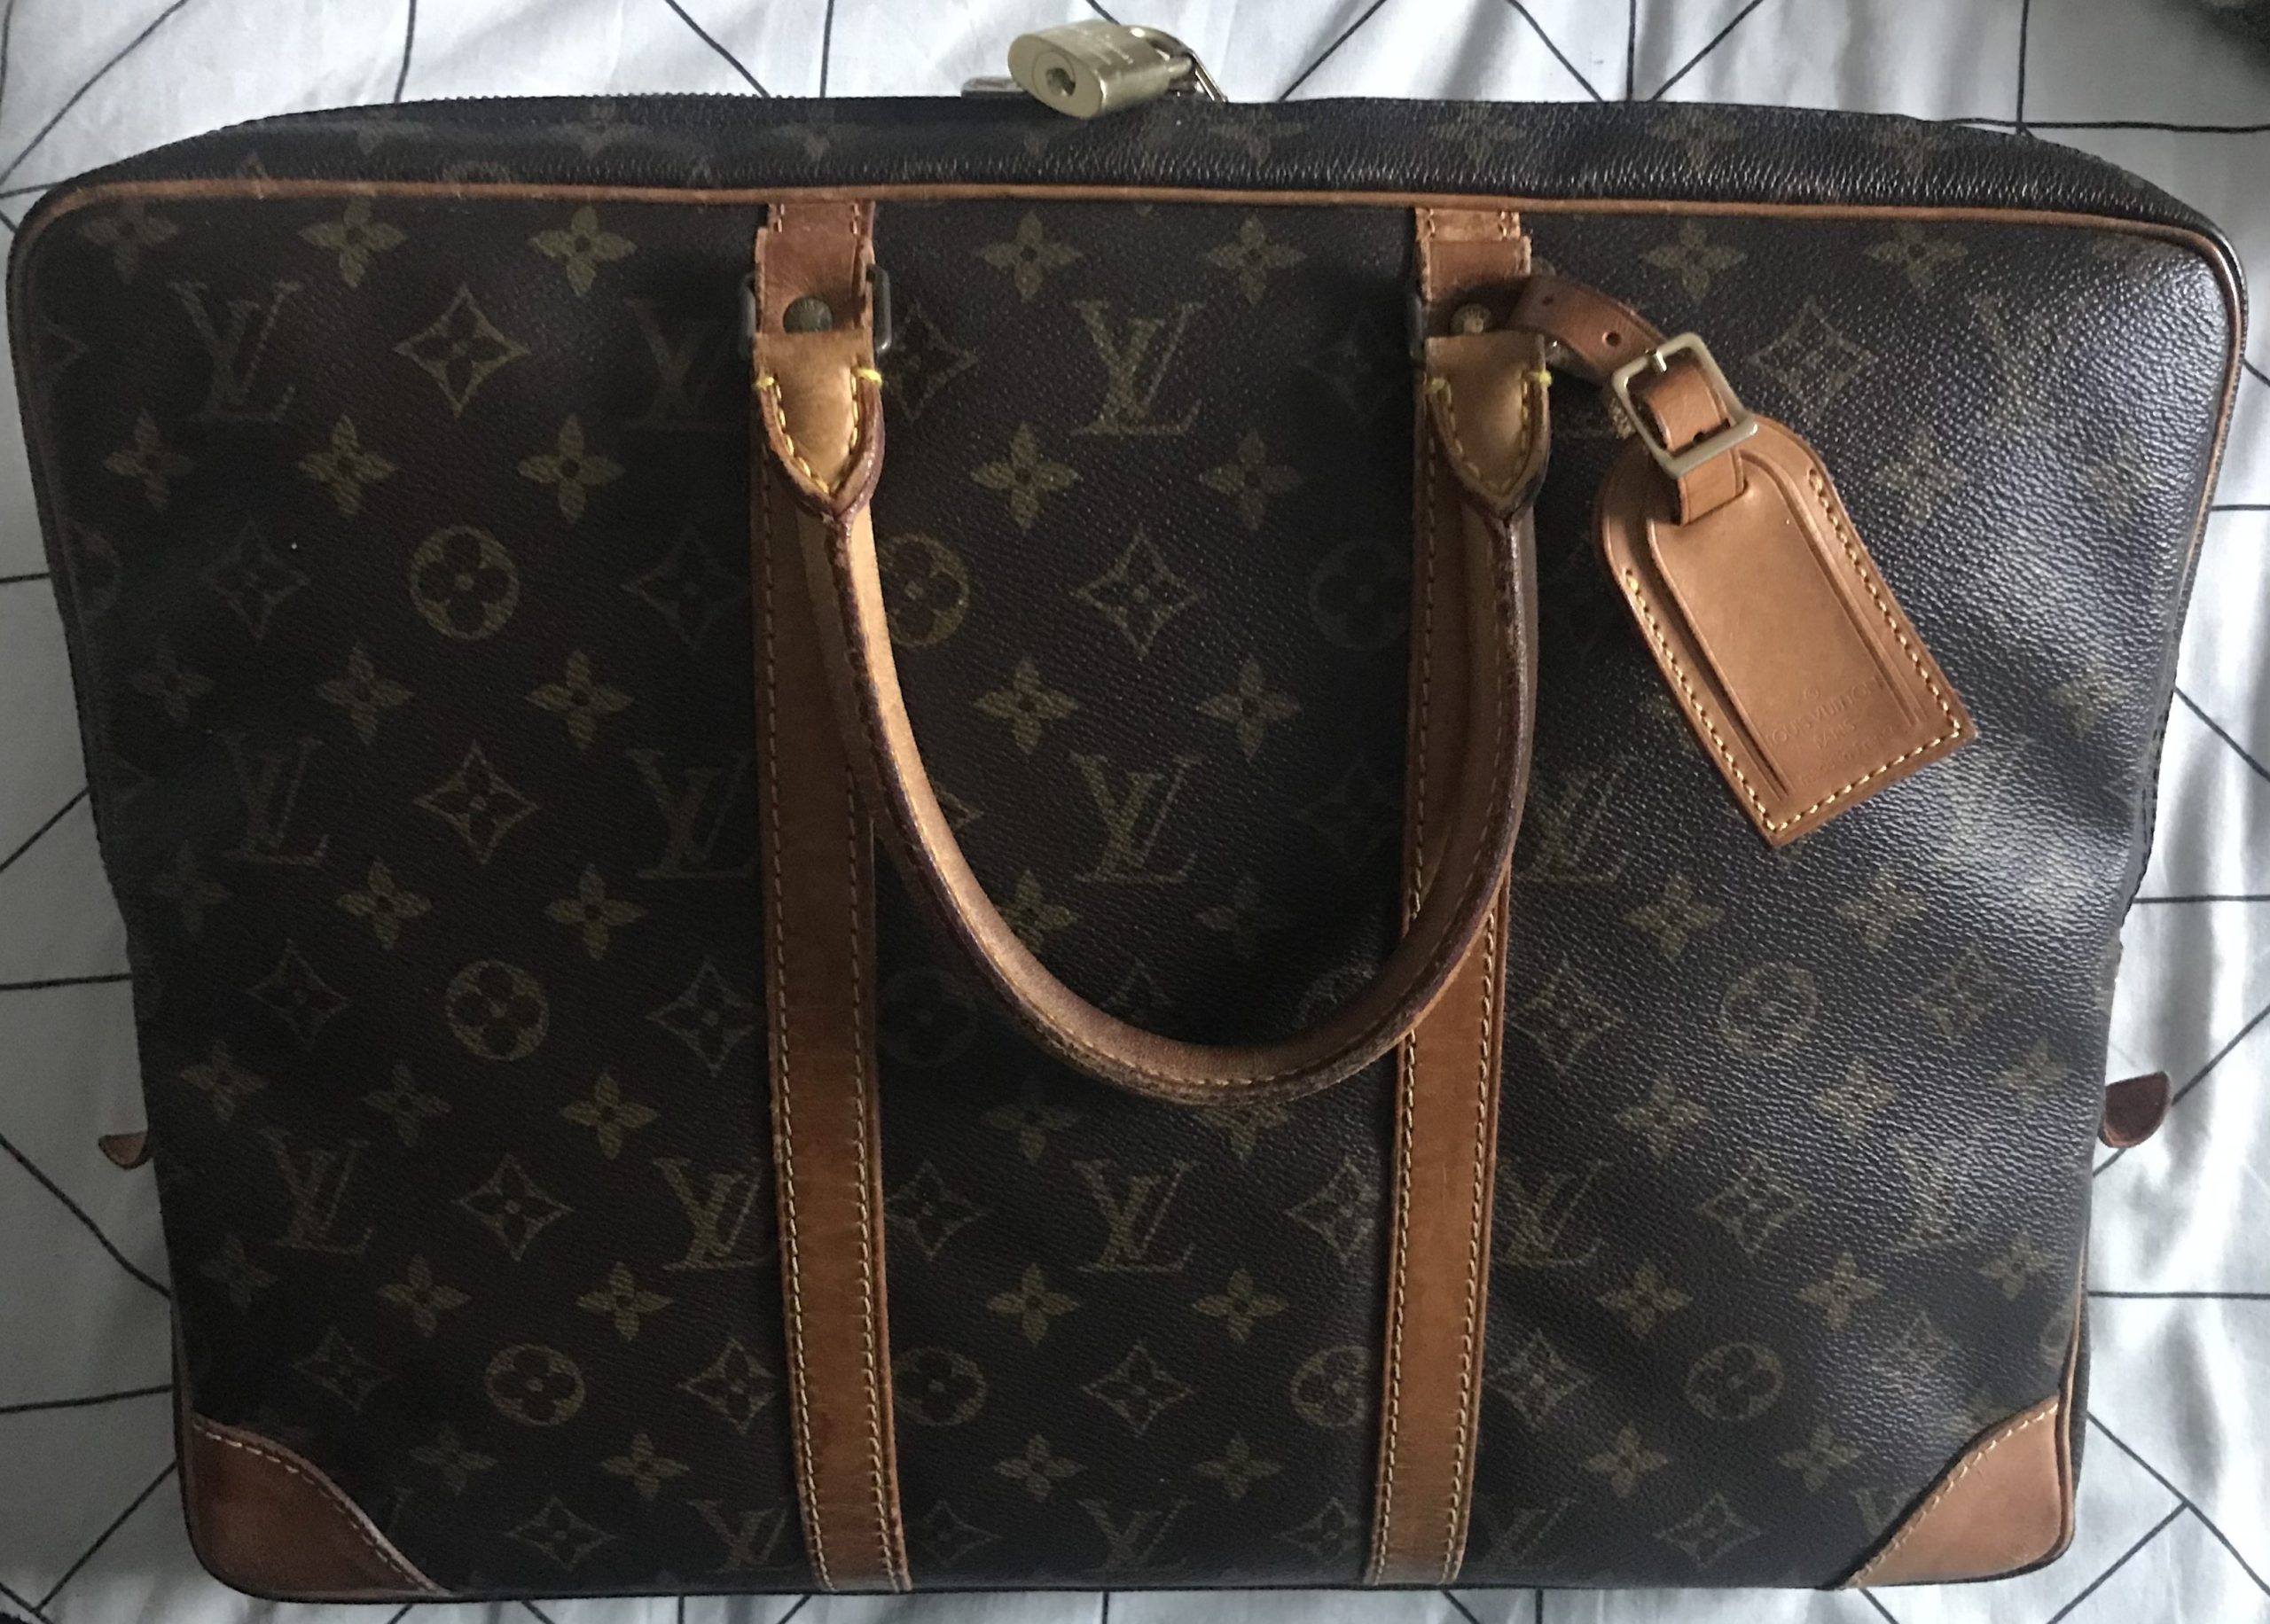 I Did Another Thing. Bought a Vintage Louis Vuitton Bag and Cleaned It Up!